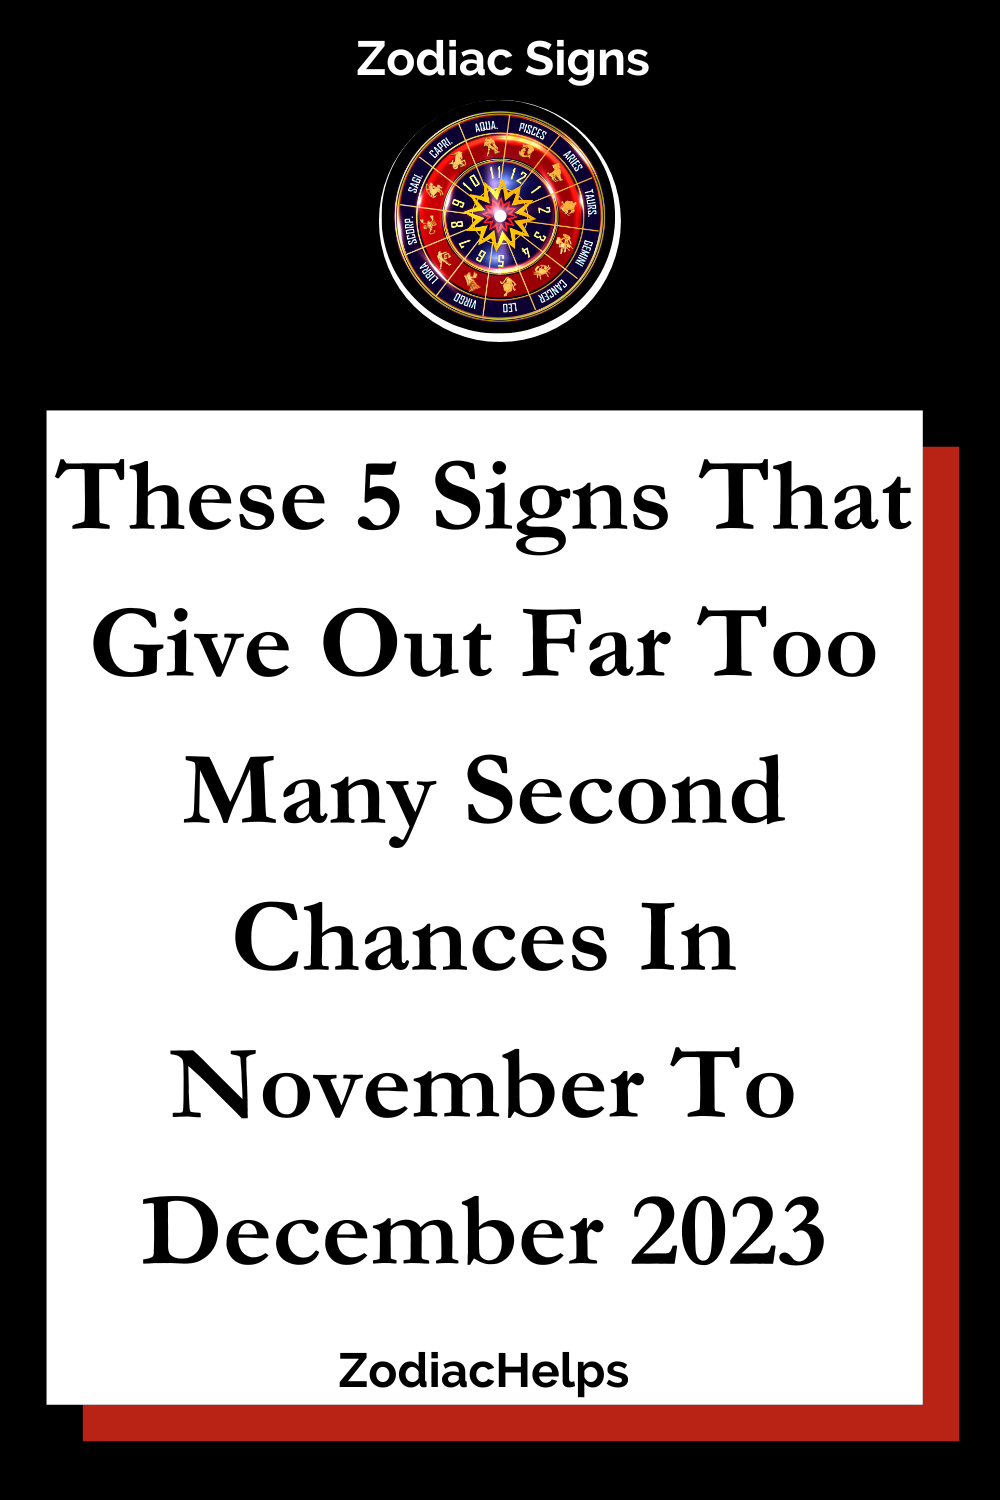 These 5 Signs That Give Out Far Too Many Second Chances In November To December 2023